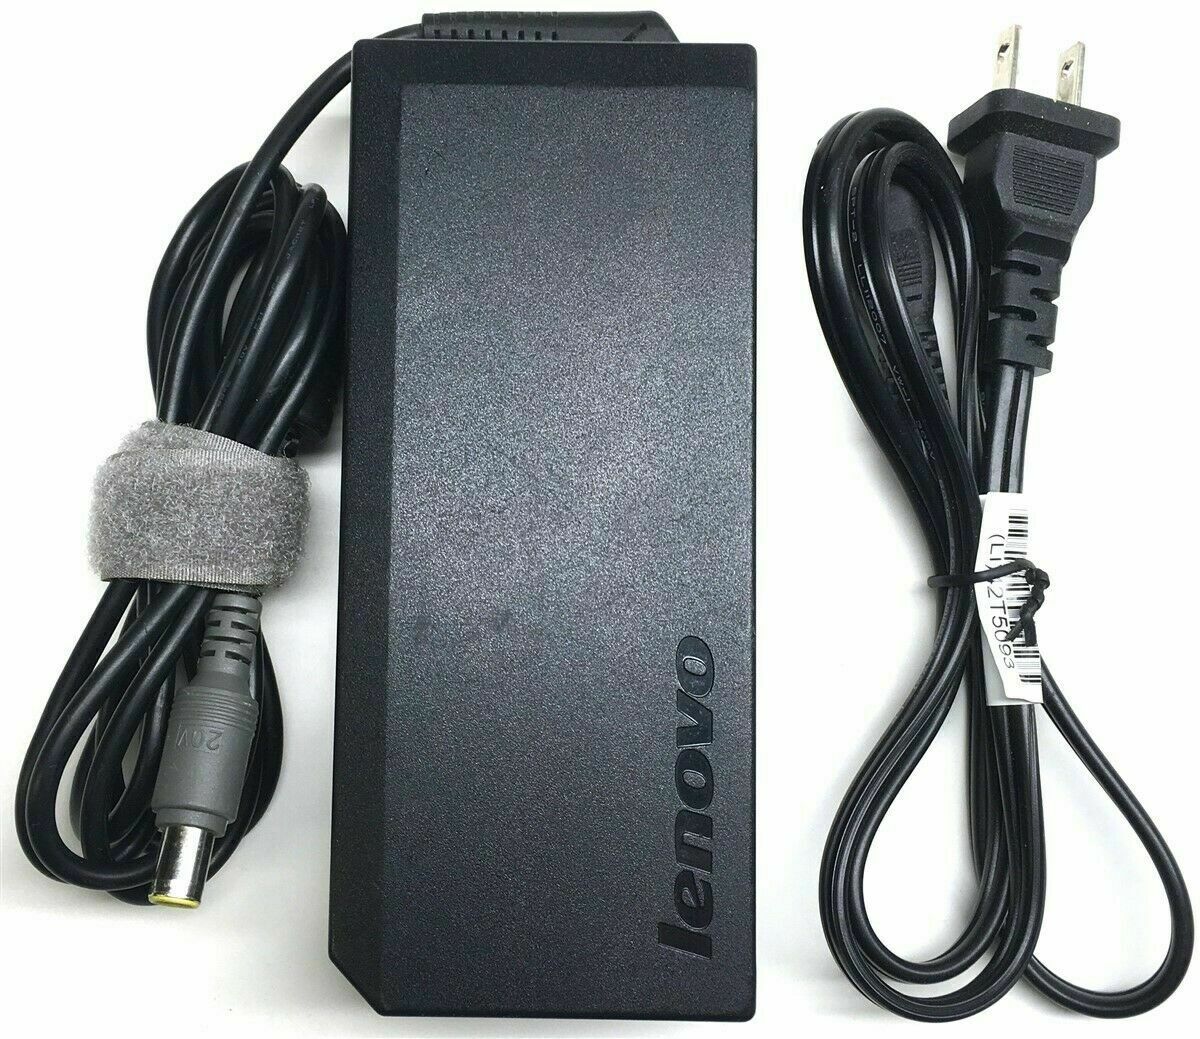 Genuine Lenovo Thinkpad 135W W510 W520 Laptop AC Adapter Power Supply Charger Compatible Brand: For Lenovo Compatib - Click Image to Close